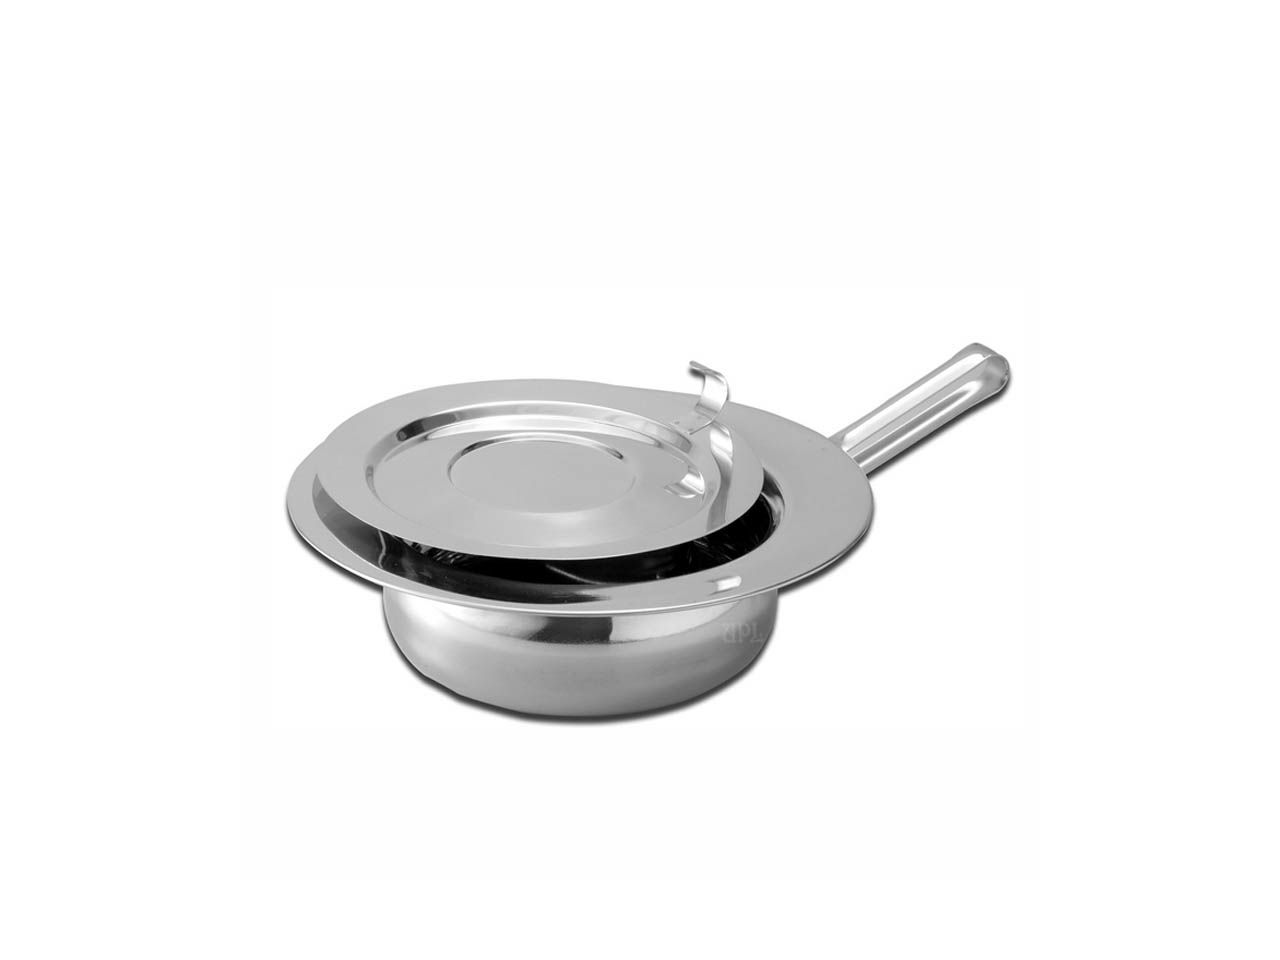 s-s-bed-pan-round-with-lid-320x85-mm-straigth-handle-26573_2.jpg